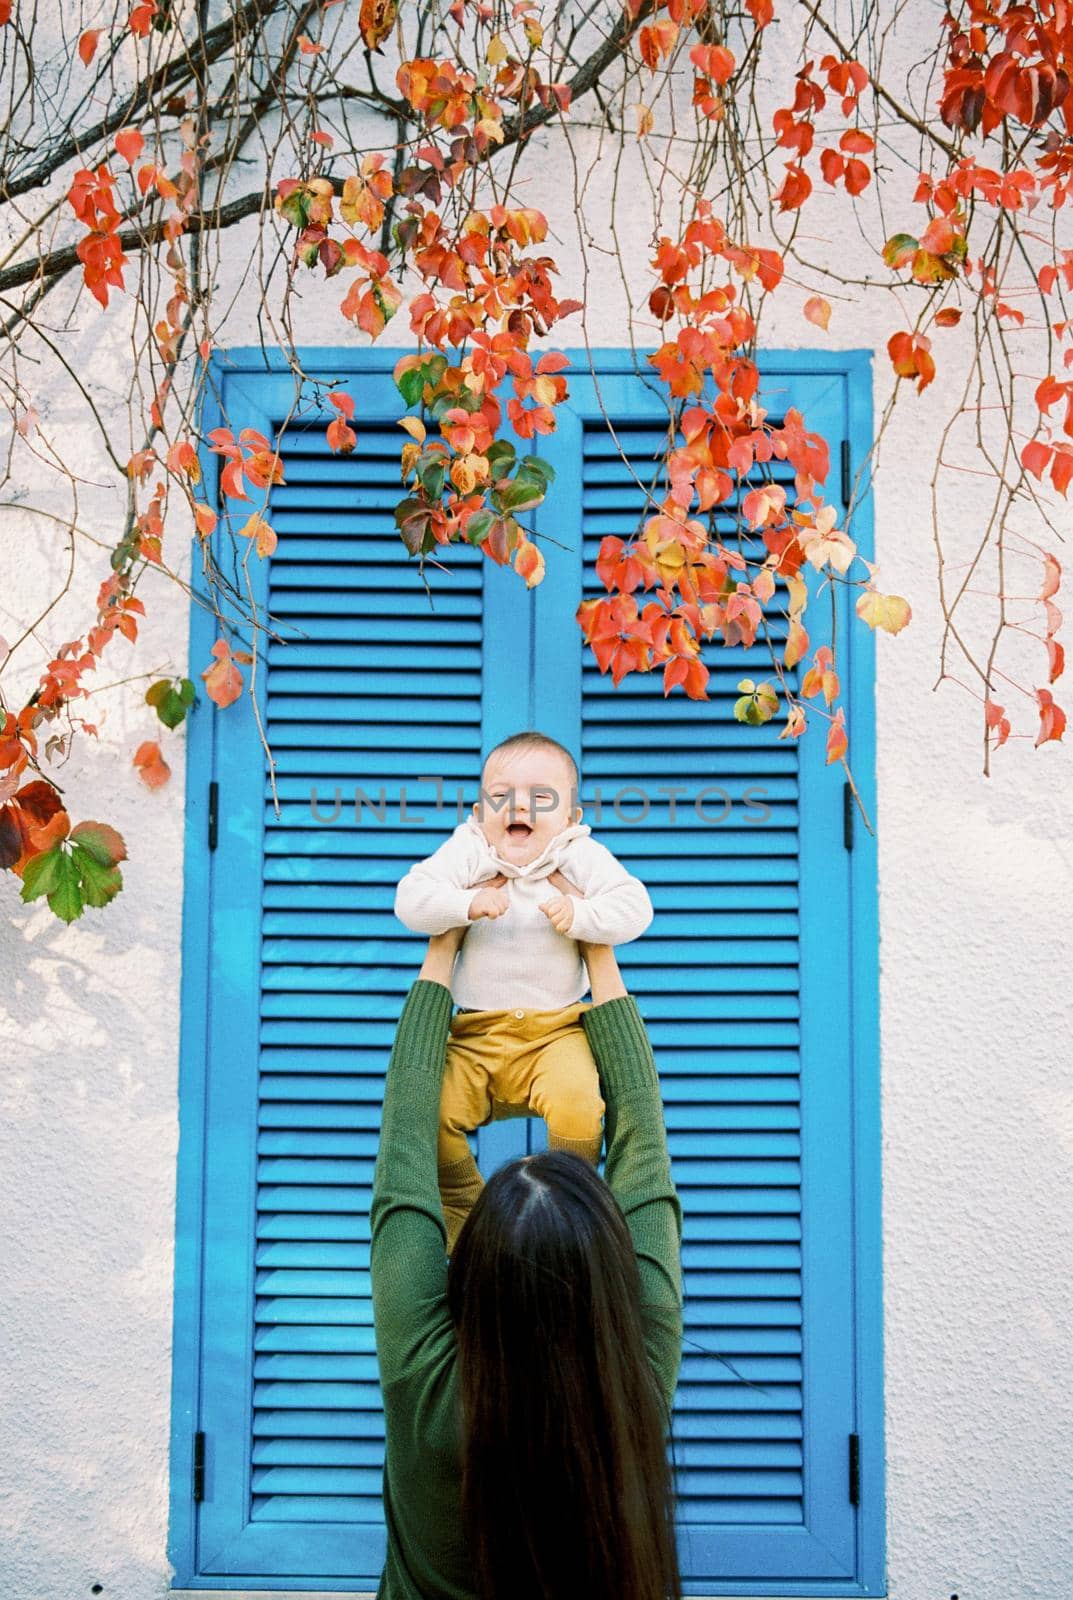 Mom holds a laughing baby high above her head near the blinds on the window. High quality photo